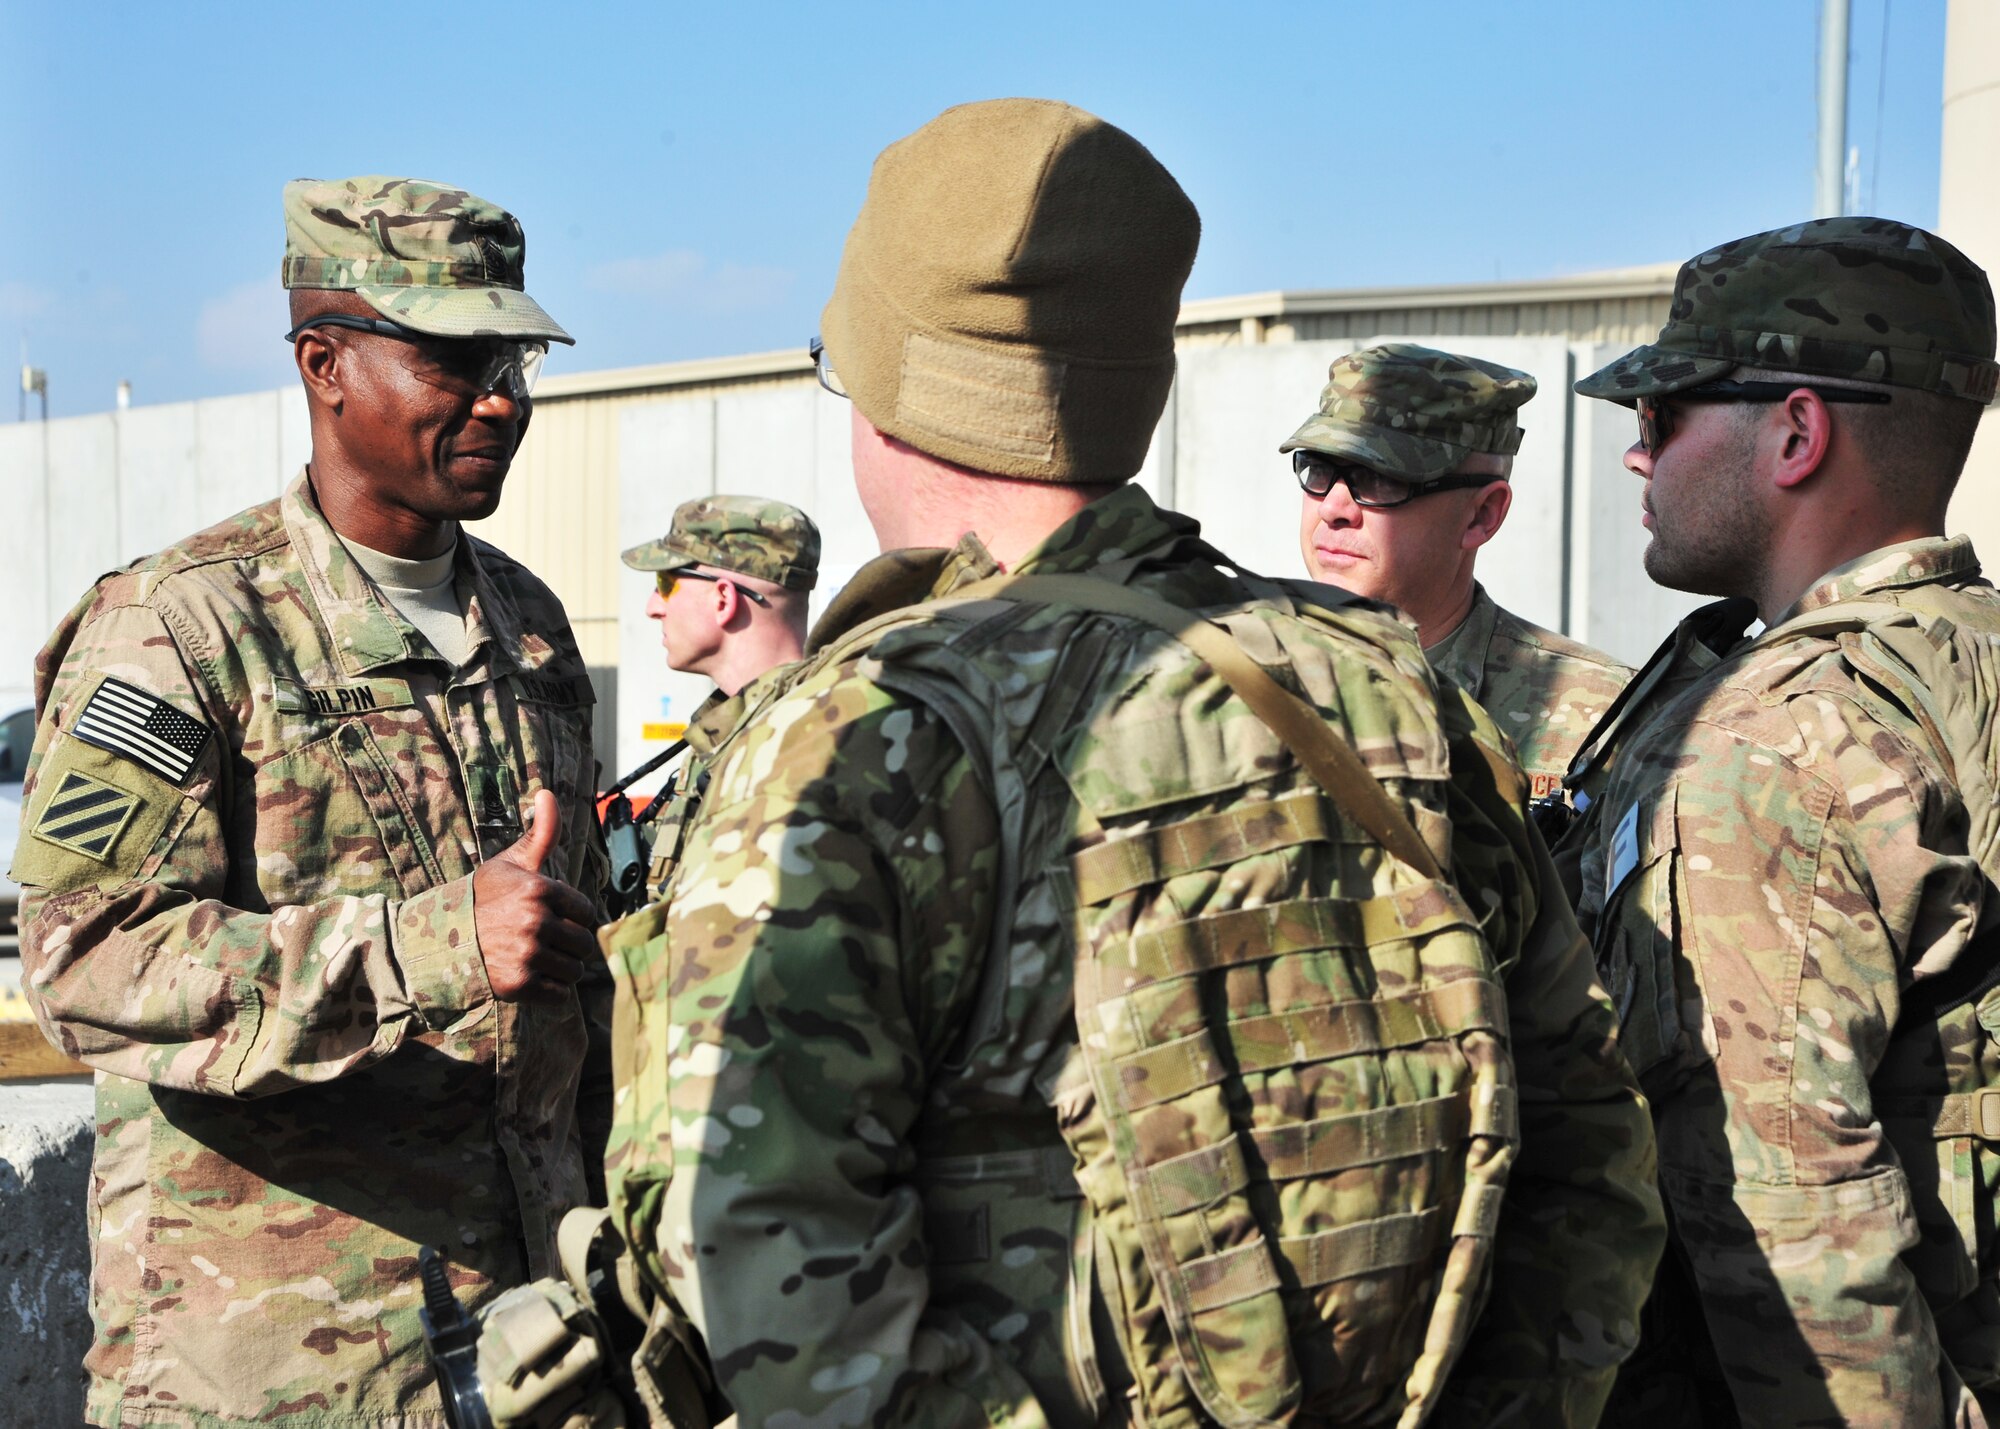 U.S. Army Command Sgt. Maj. Christopher Gilpin, Combined Joint Task Force 3 United States Forces Afghanistan, meets with Airmen assigned to the 455th Expeditionary Security Forces Squadron during a tour Jan. 6, 2015 at Bagram Airfield, Afghanistan. During the tour, Gilpin had the opportunity to meet with 455th Air Expeditionary Wing leadership and become better acquainted with Air Force assets and squadrons. (U.S. Air Force photo by Staff Sgt. Whitney Amstutz/released)